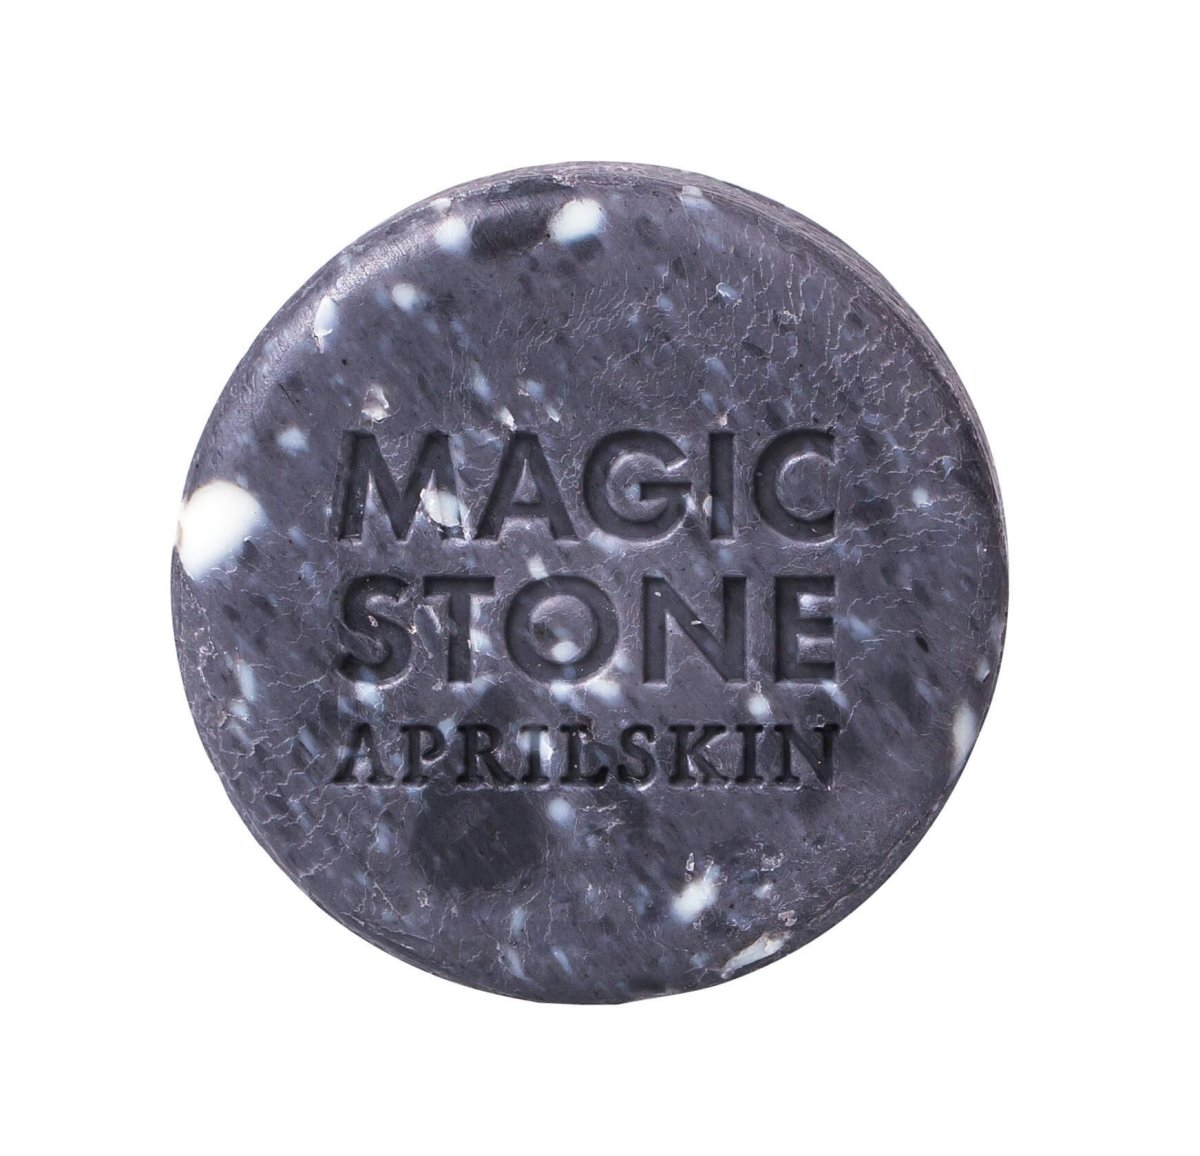 April Skin Magic Stone soap, $7, available at Peach & Lily.